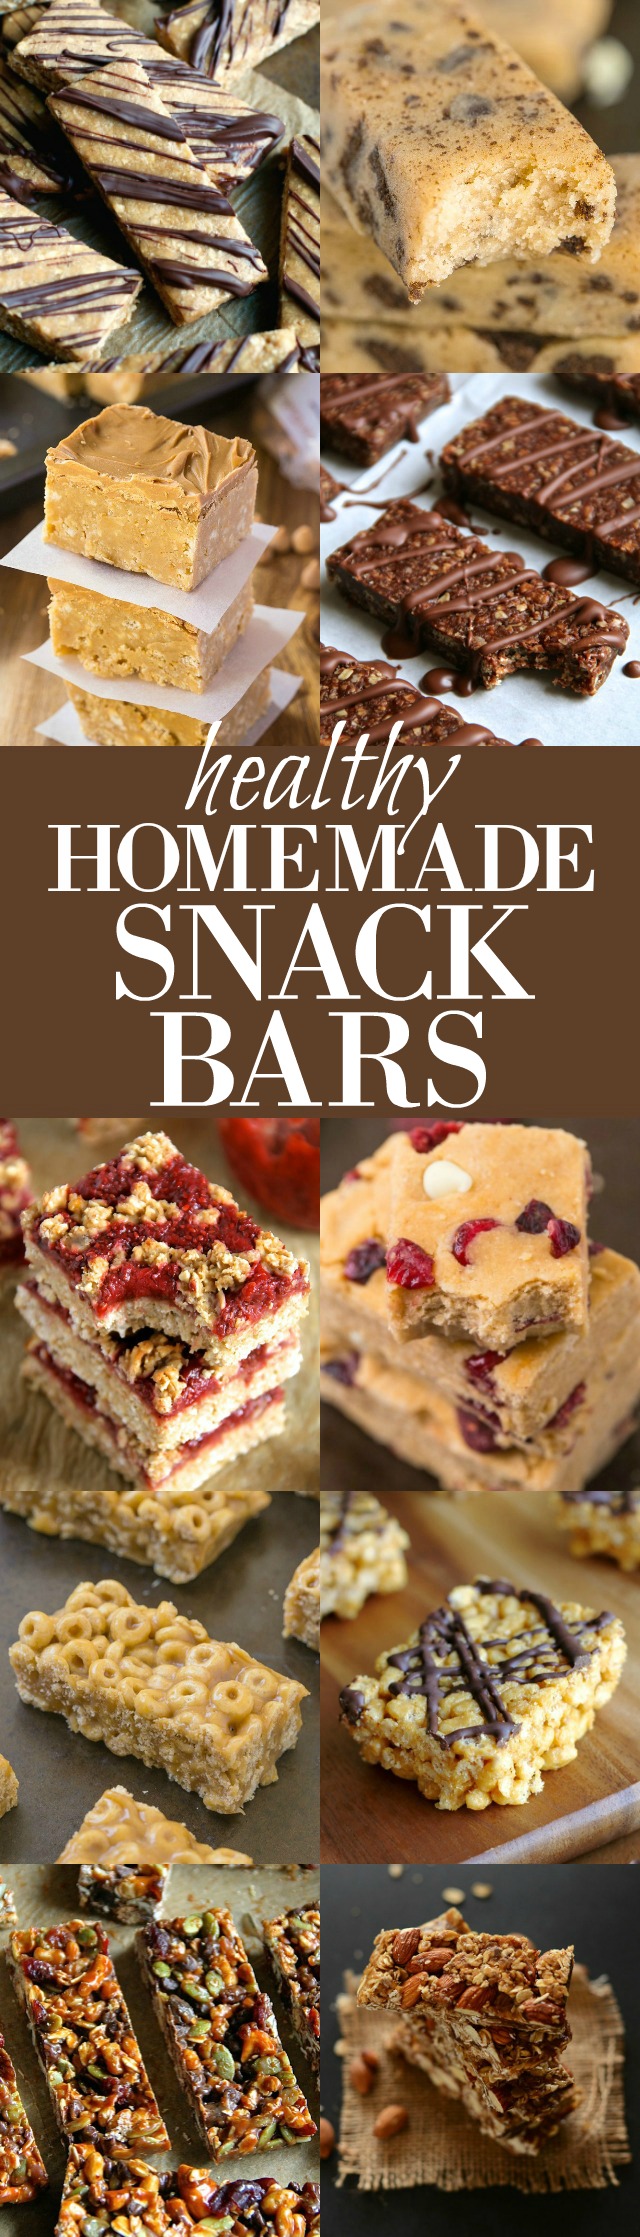 Don't pay an arm and a leg for mediocre store-bought bars! Make AMAZING ones at home with this collection of healthy recipes! | runningwithspoons.com